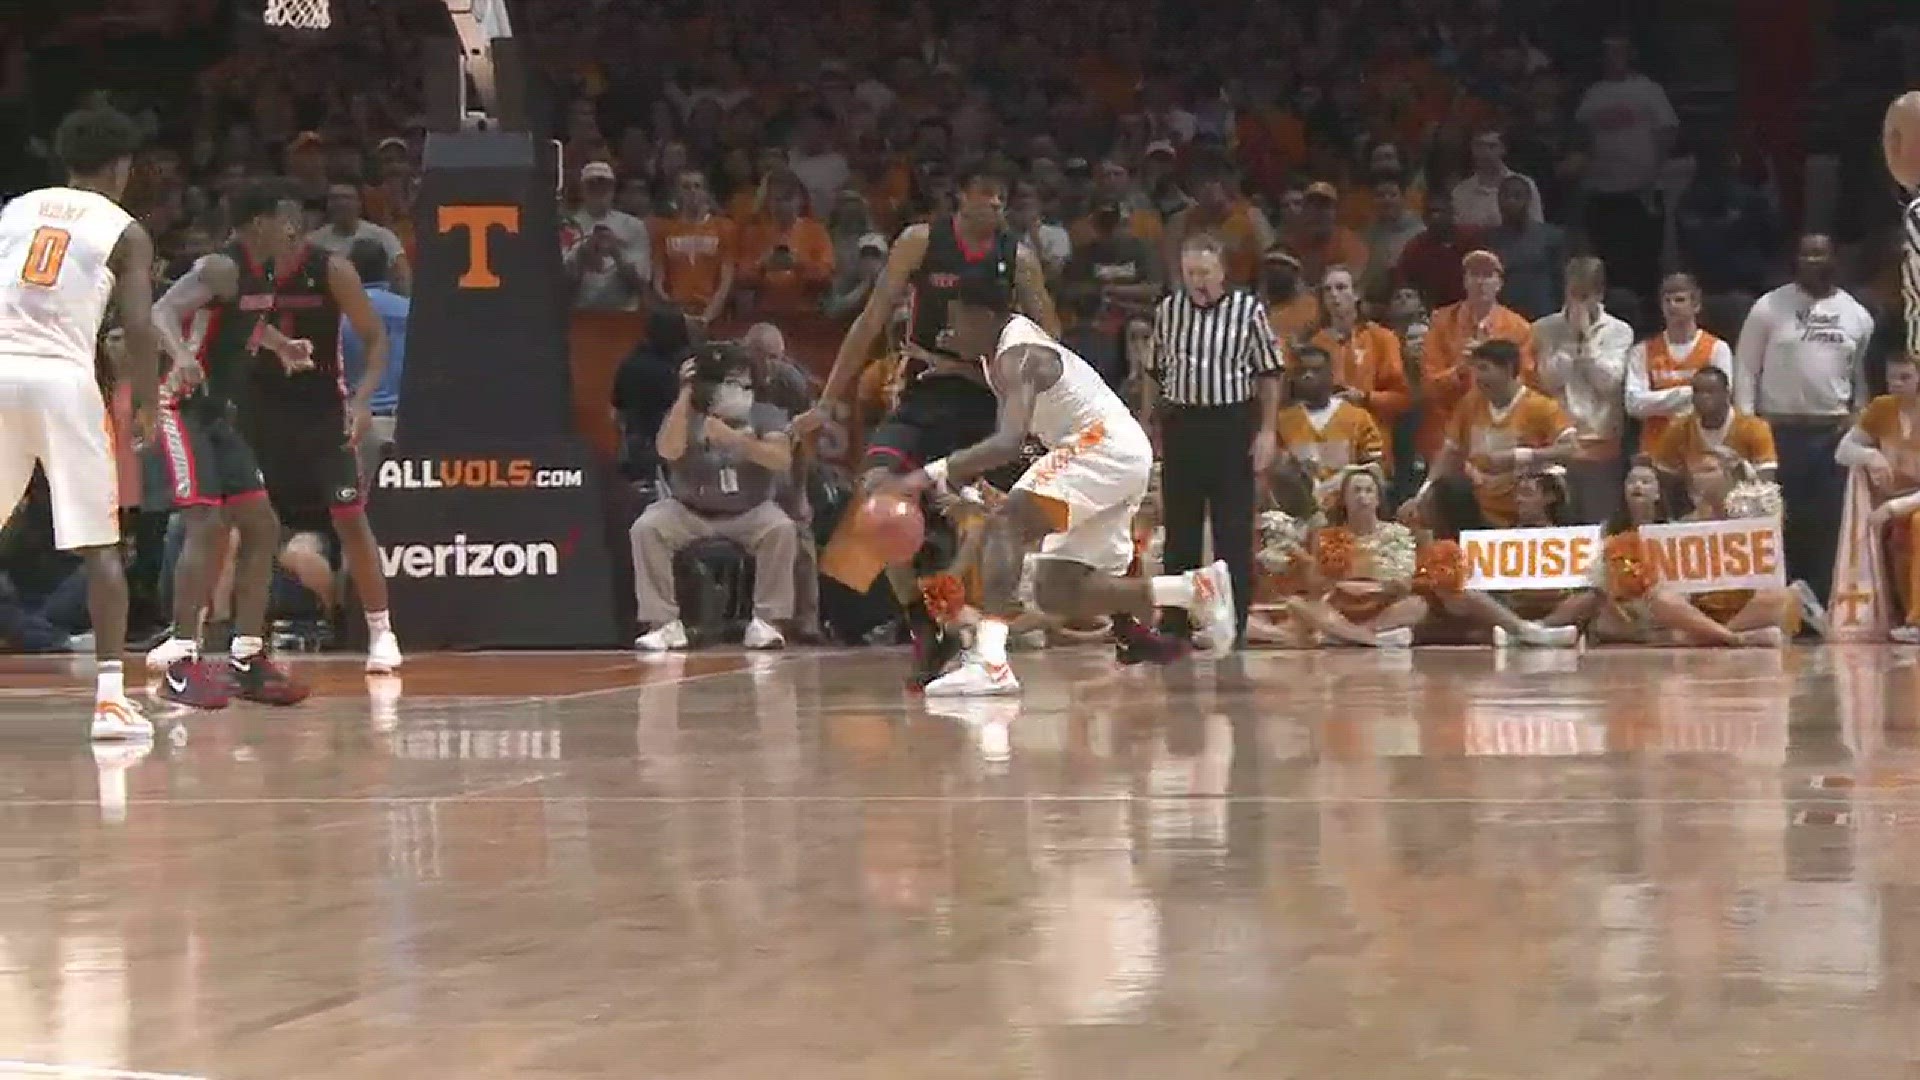 The Vols took down Georgia in front of a sell-out crowd at Thompson-Boling Arena and claimed a share of the SEC regular season championship for the first time since 2008.